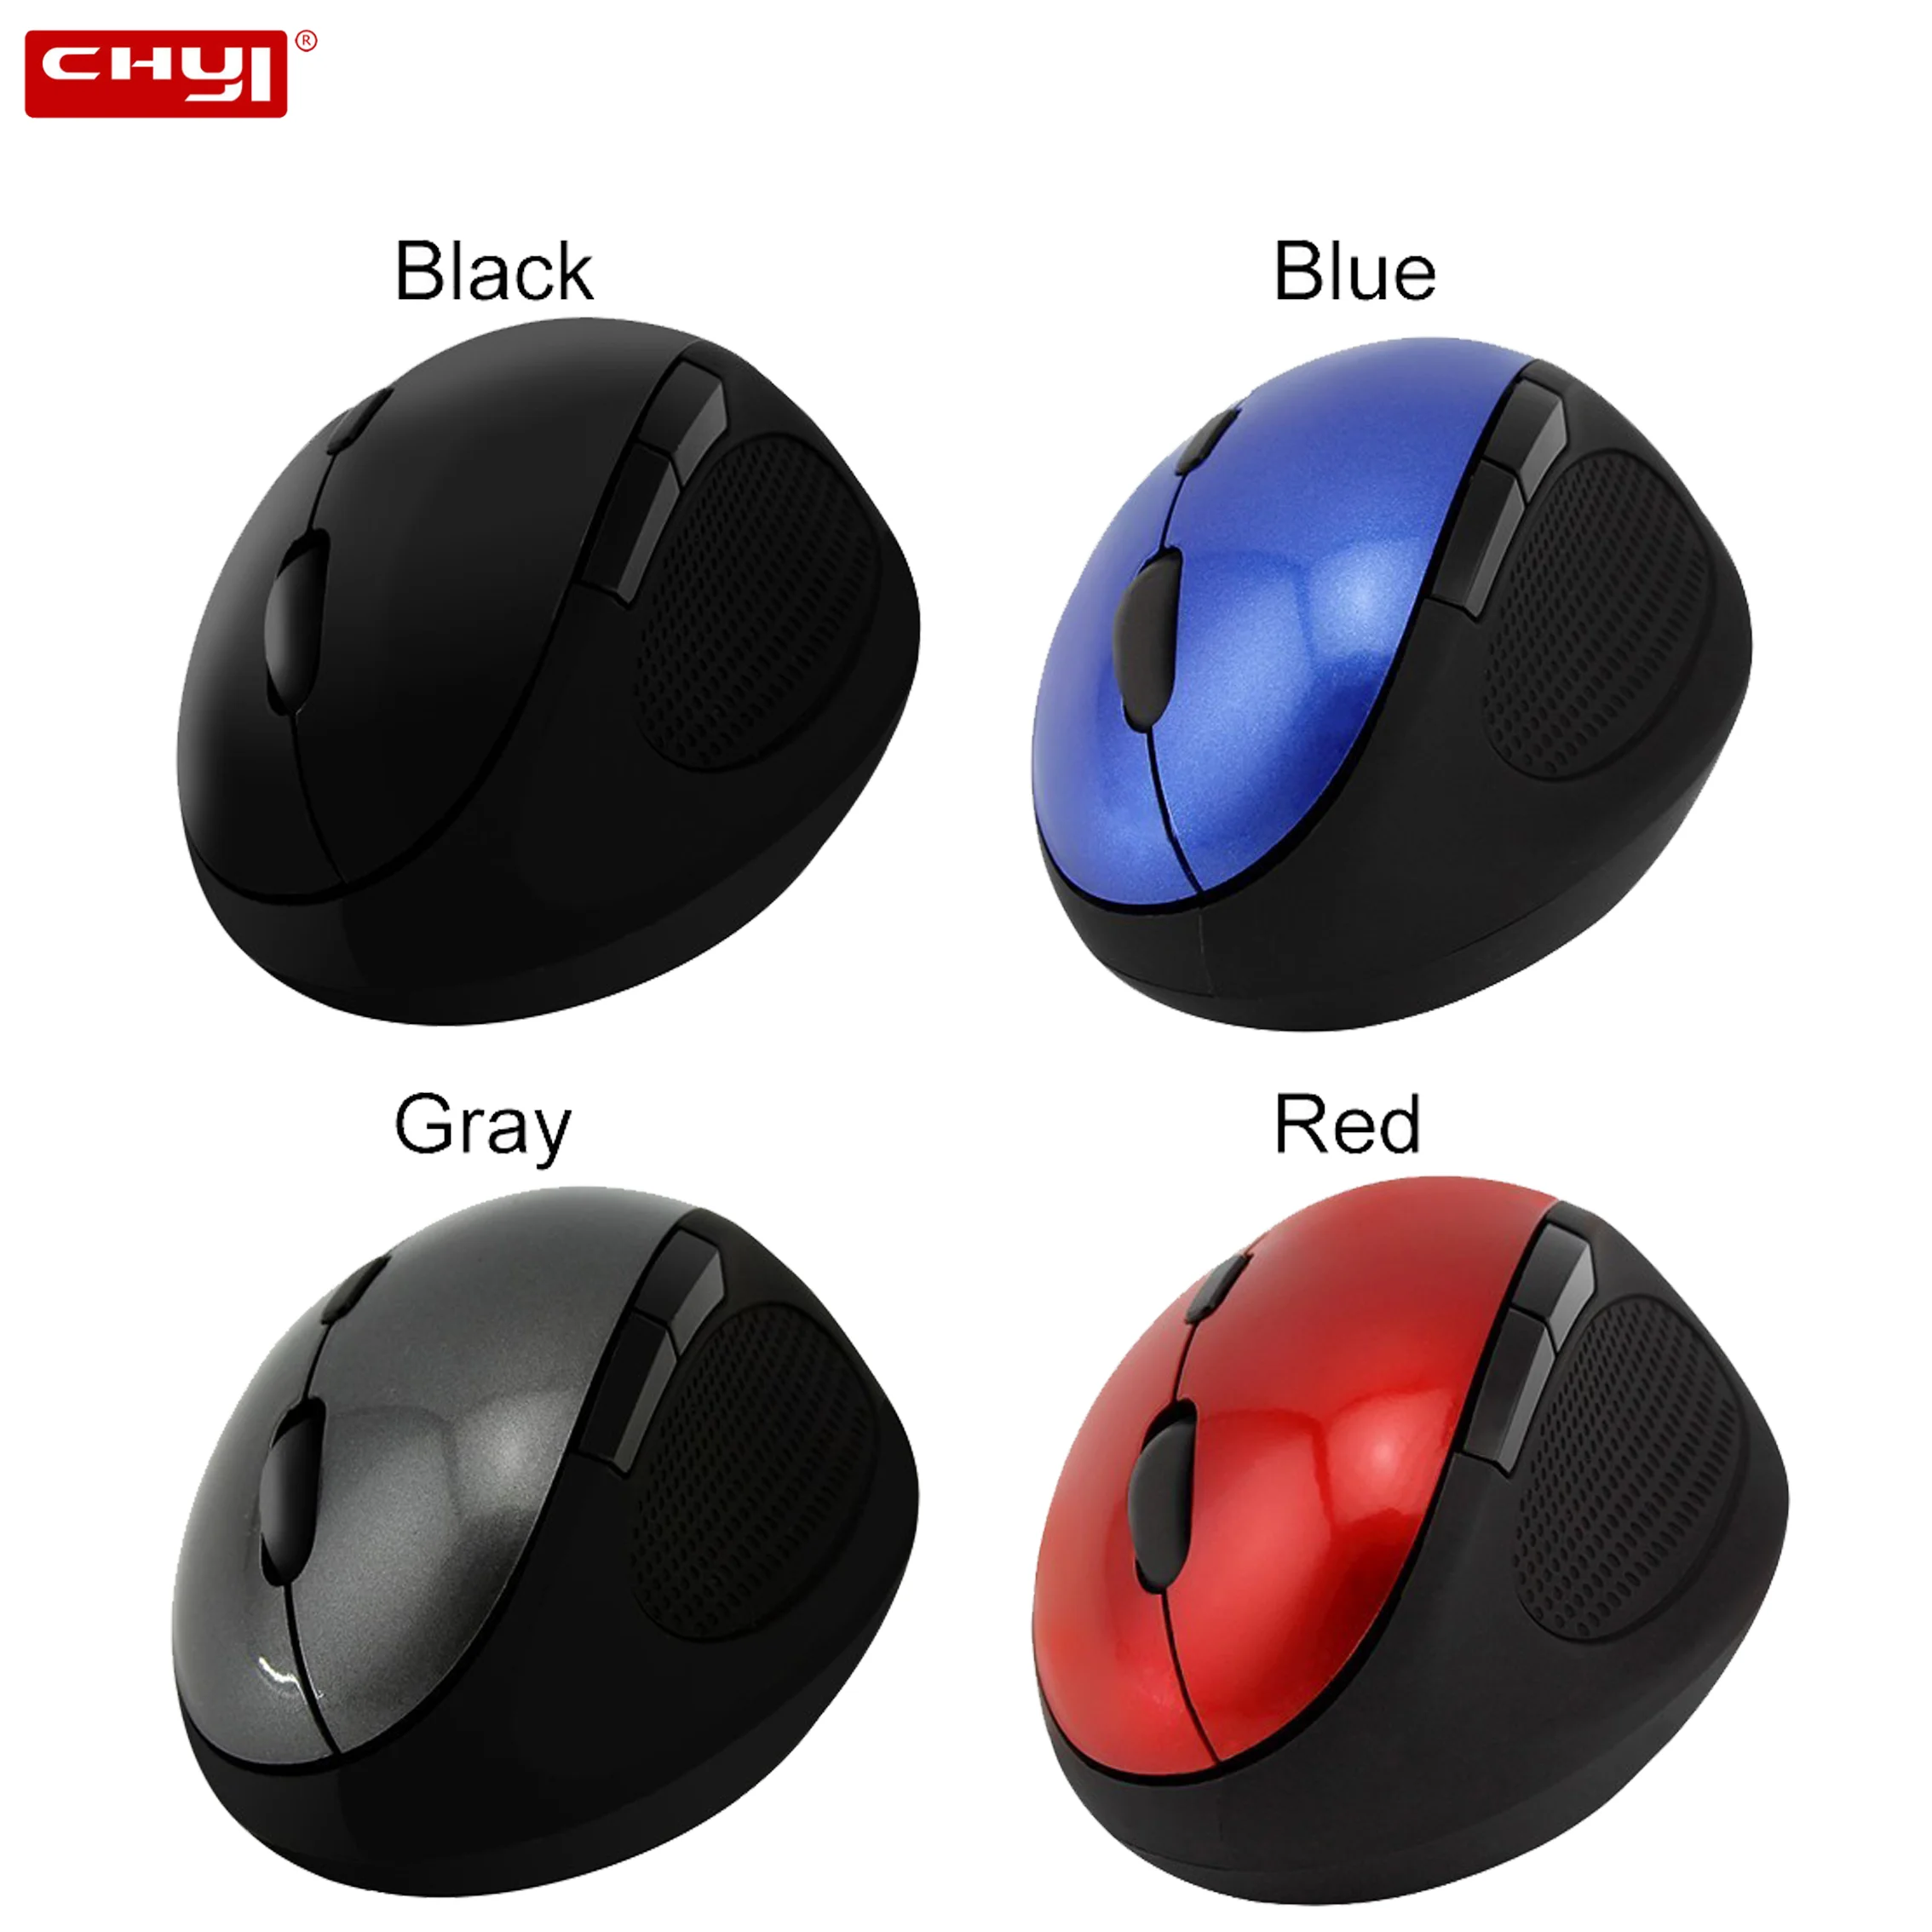 

CHYI Ergonomic Gaming Mouse USB 2.4Ghz Wireless Vertical Mouse 1600DPI Optical 6 Buttons Mice Computer Mause For PC Laptop Gamer